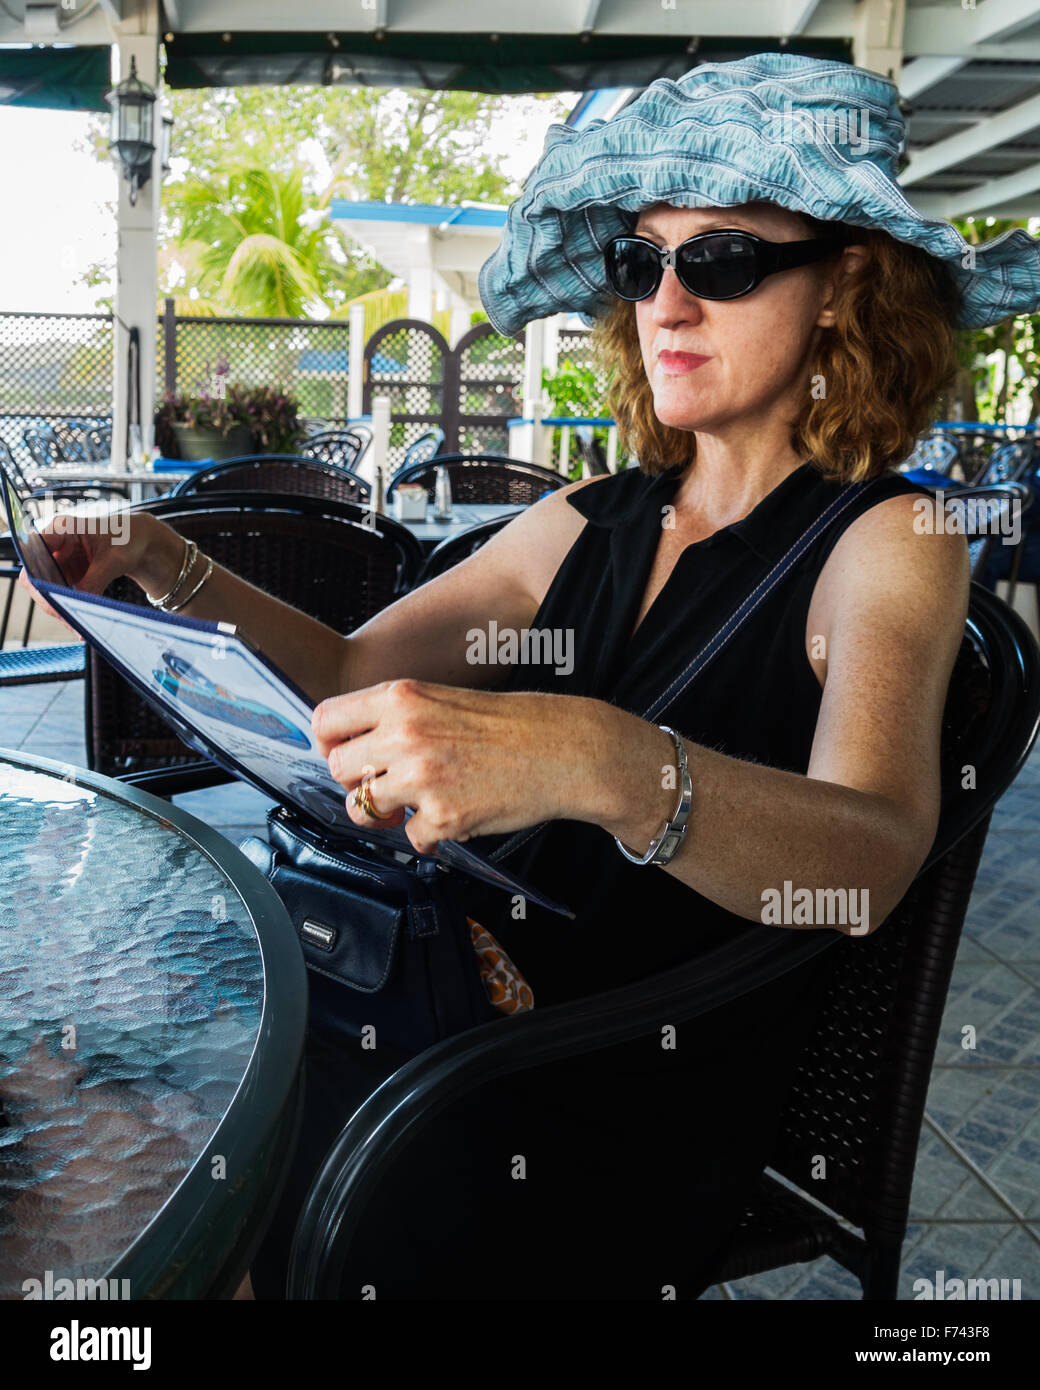 A 50 year old Caucasian woman seriously studies a menu at a beachside cafe in St. Croix, U.S. Virgin Islands. Stock Photo